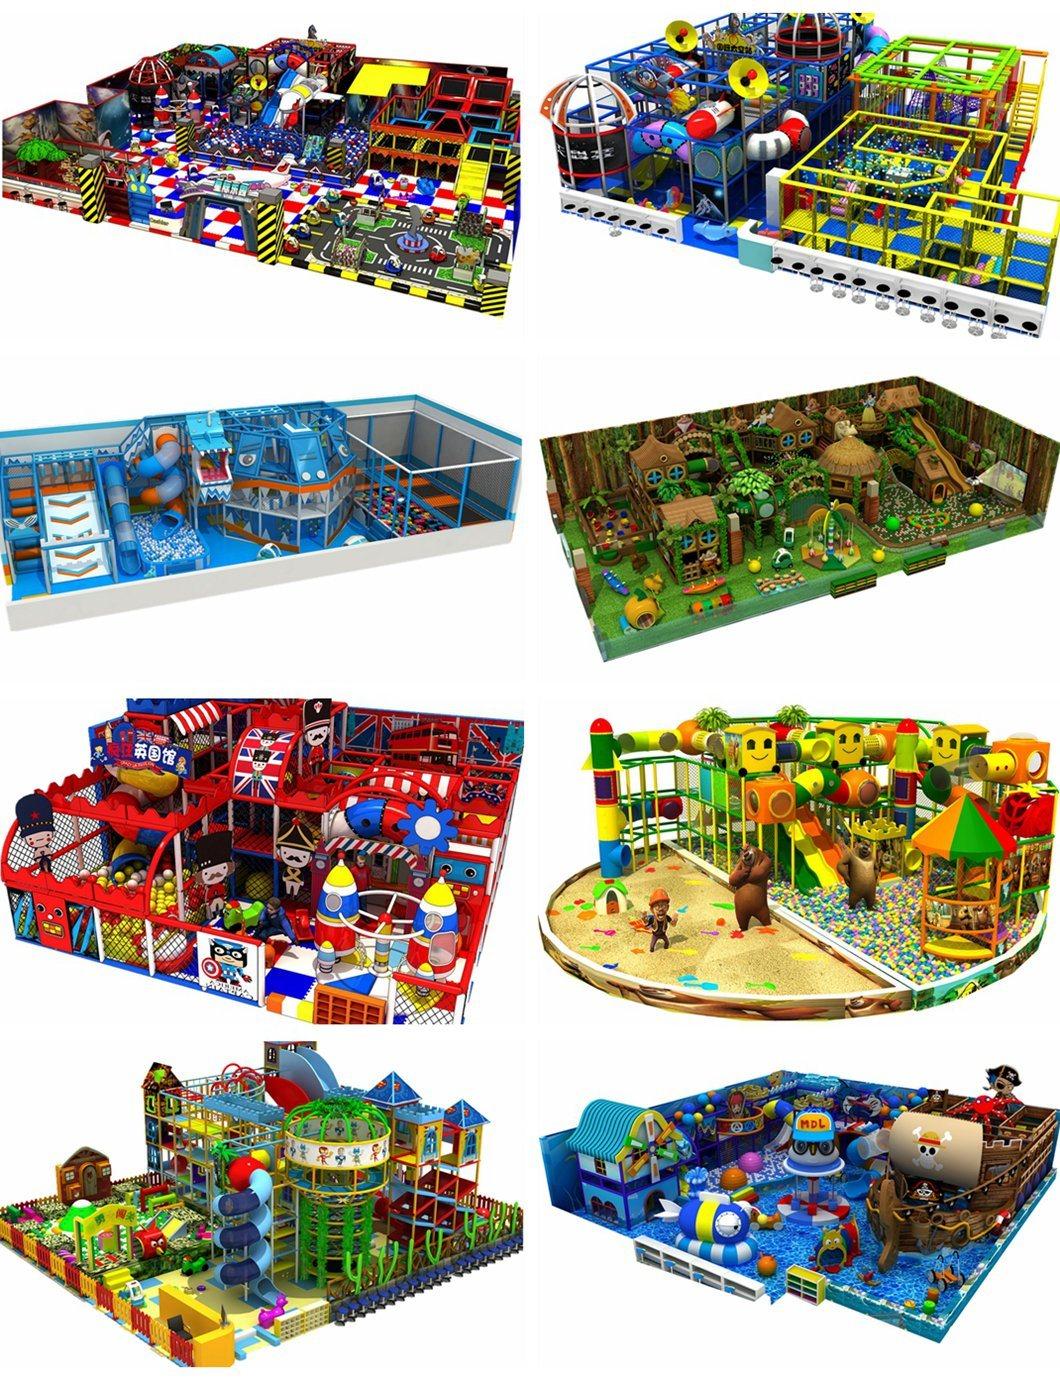 Kids Indoor Playground Soft Games Mall Commercial Amusement Park Equipment